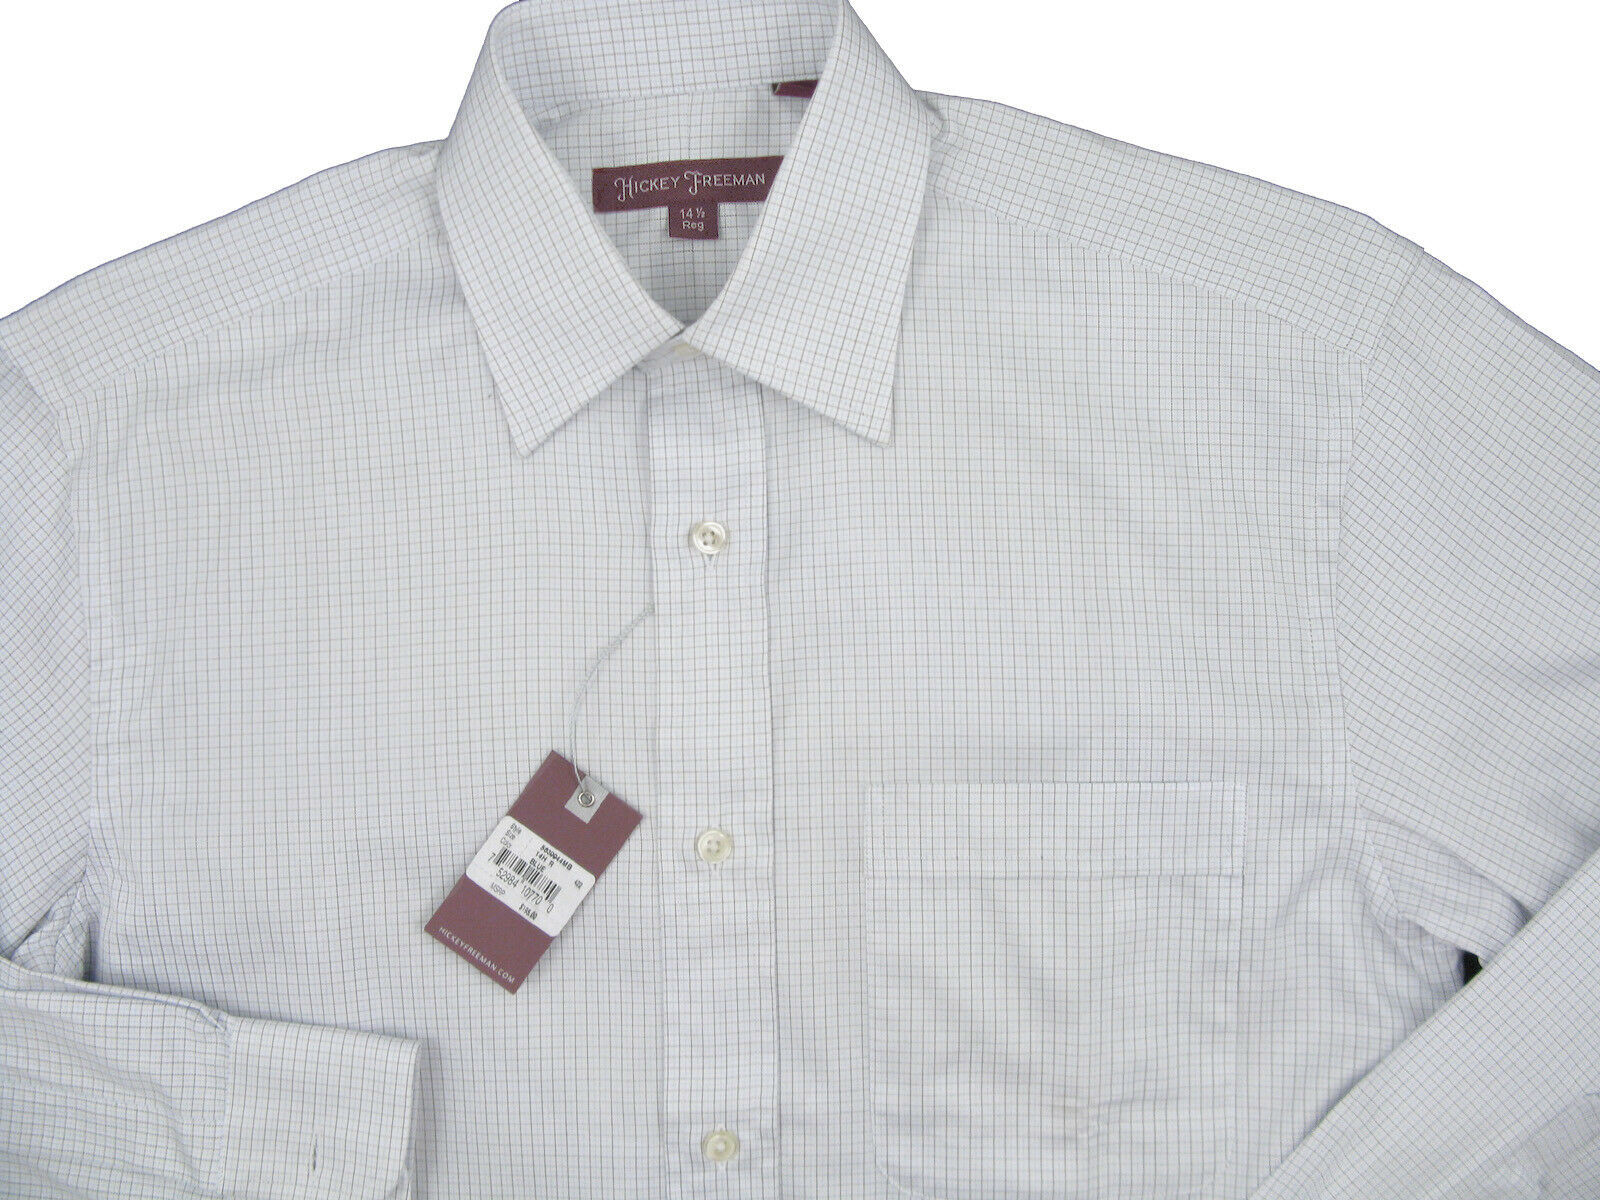 Primary image for NEW $195 Hickey Freeman Dress Shirt!  17 Reg (35)   White with Check Pattern